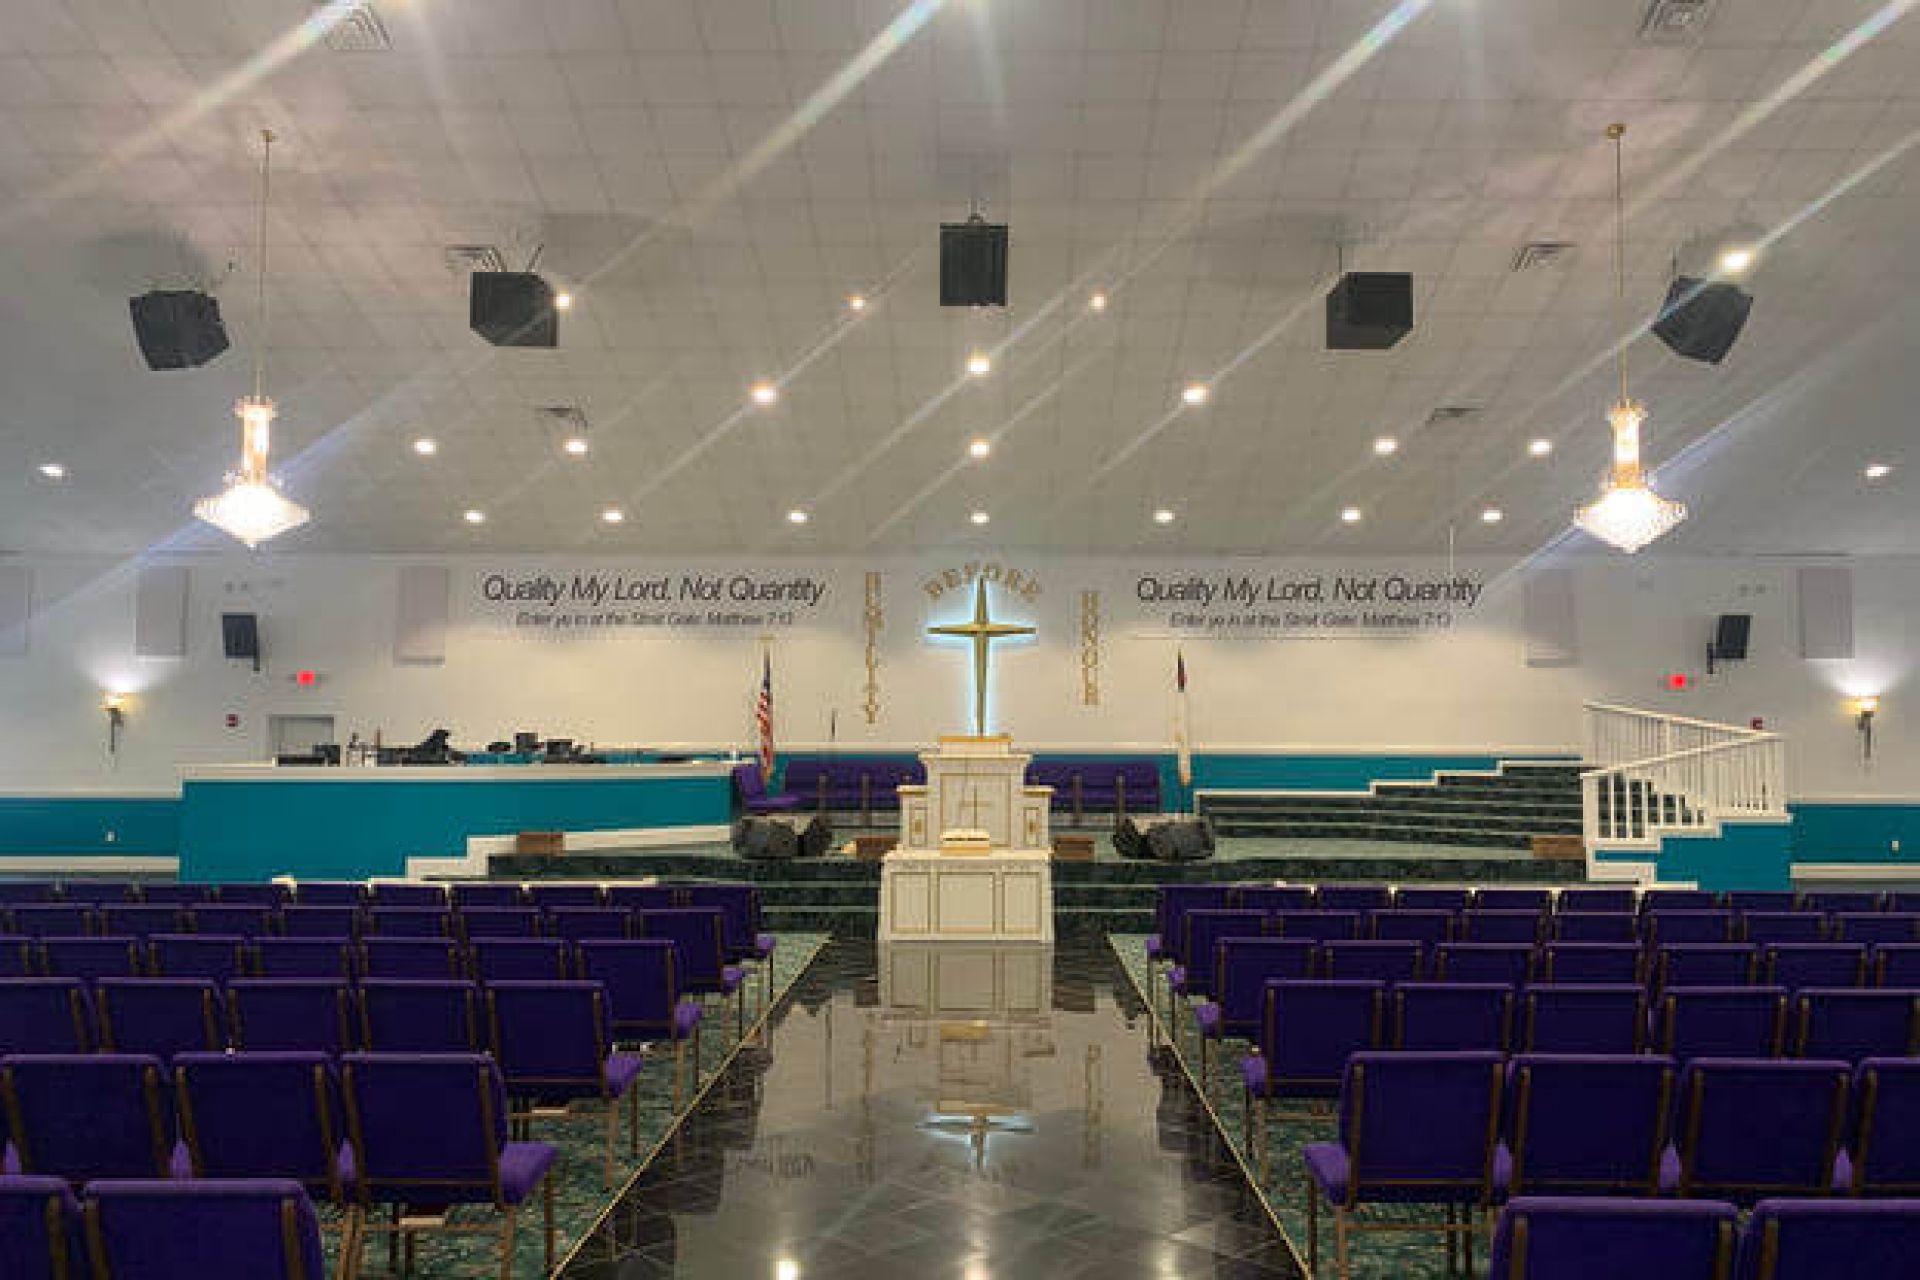 The altar of the main church for the House of Prayer in Hinesville, Georgia, features a large cross and a reference to a verse from the gospel of Matthew. (Military.com photo by Thomas Novelly)